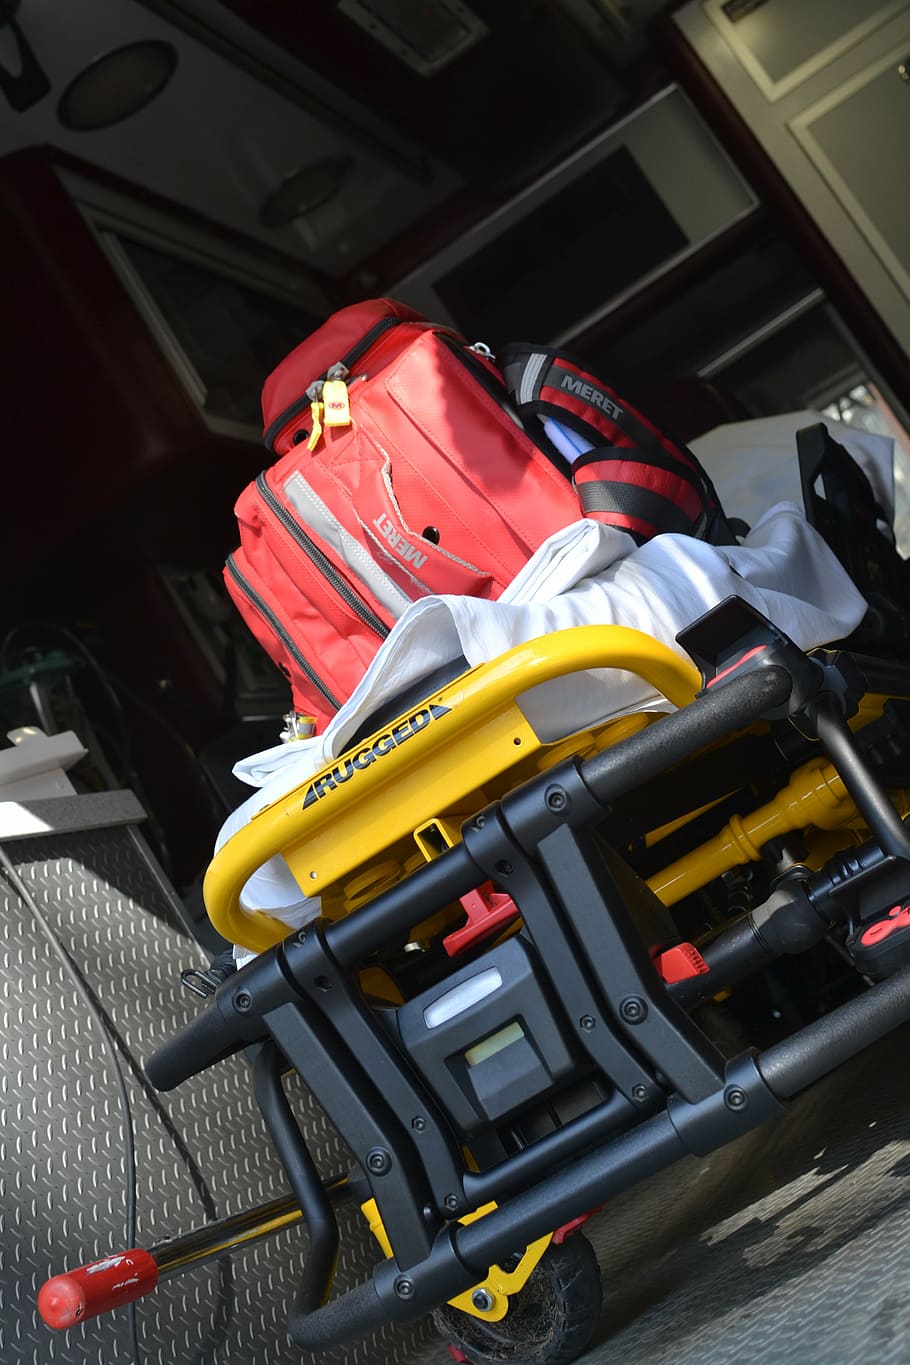 red, bag, top, yellow, cart, ems, emergency, ambulance, medical, healthcare